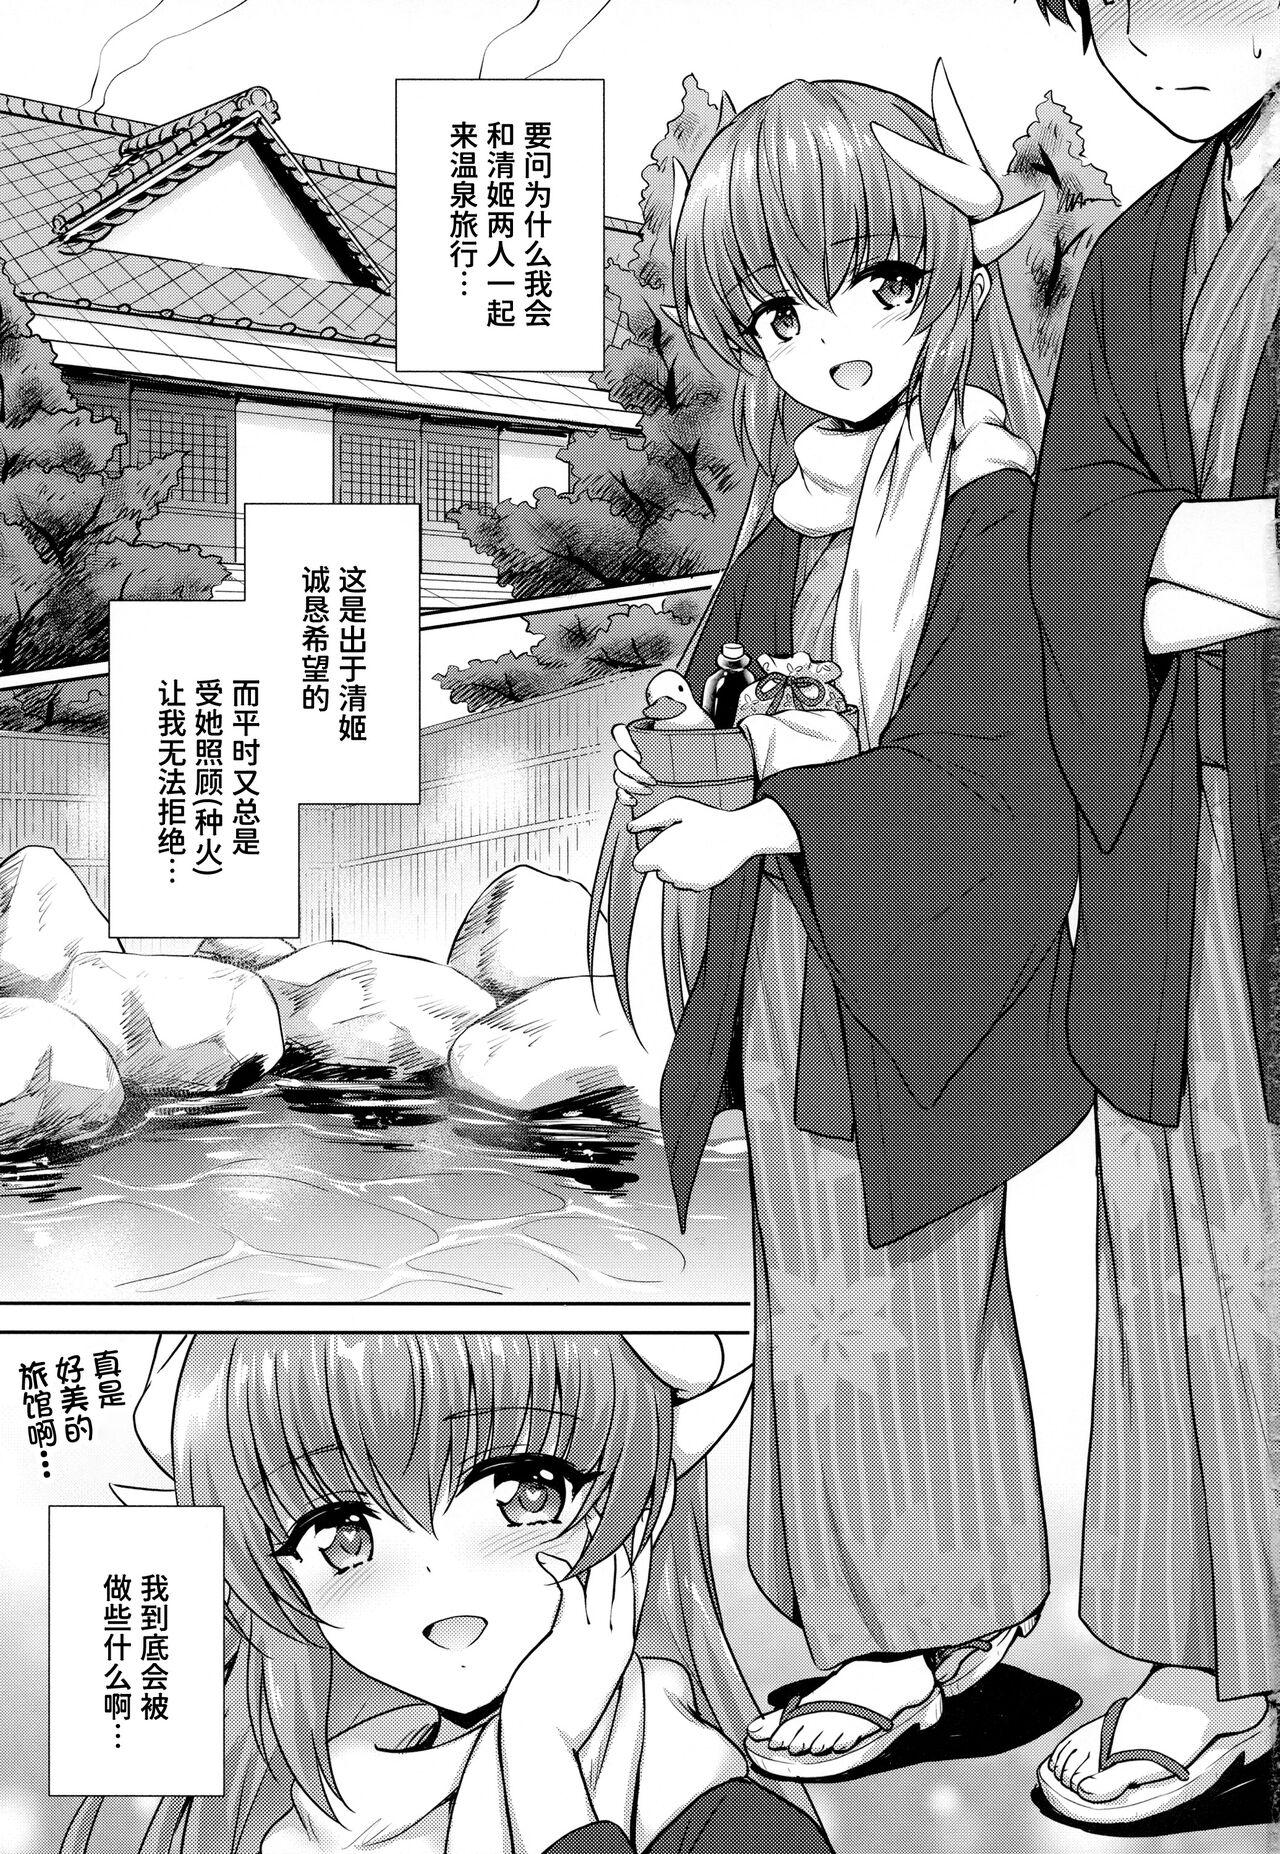 Jerkoff Kiyohime Onsen - Fate grand order Rubdown - Page 3